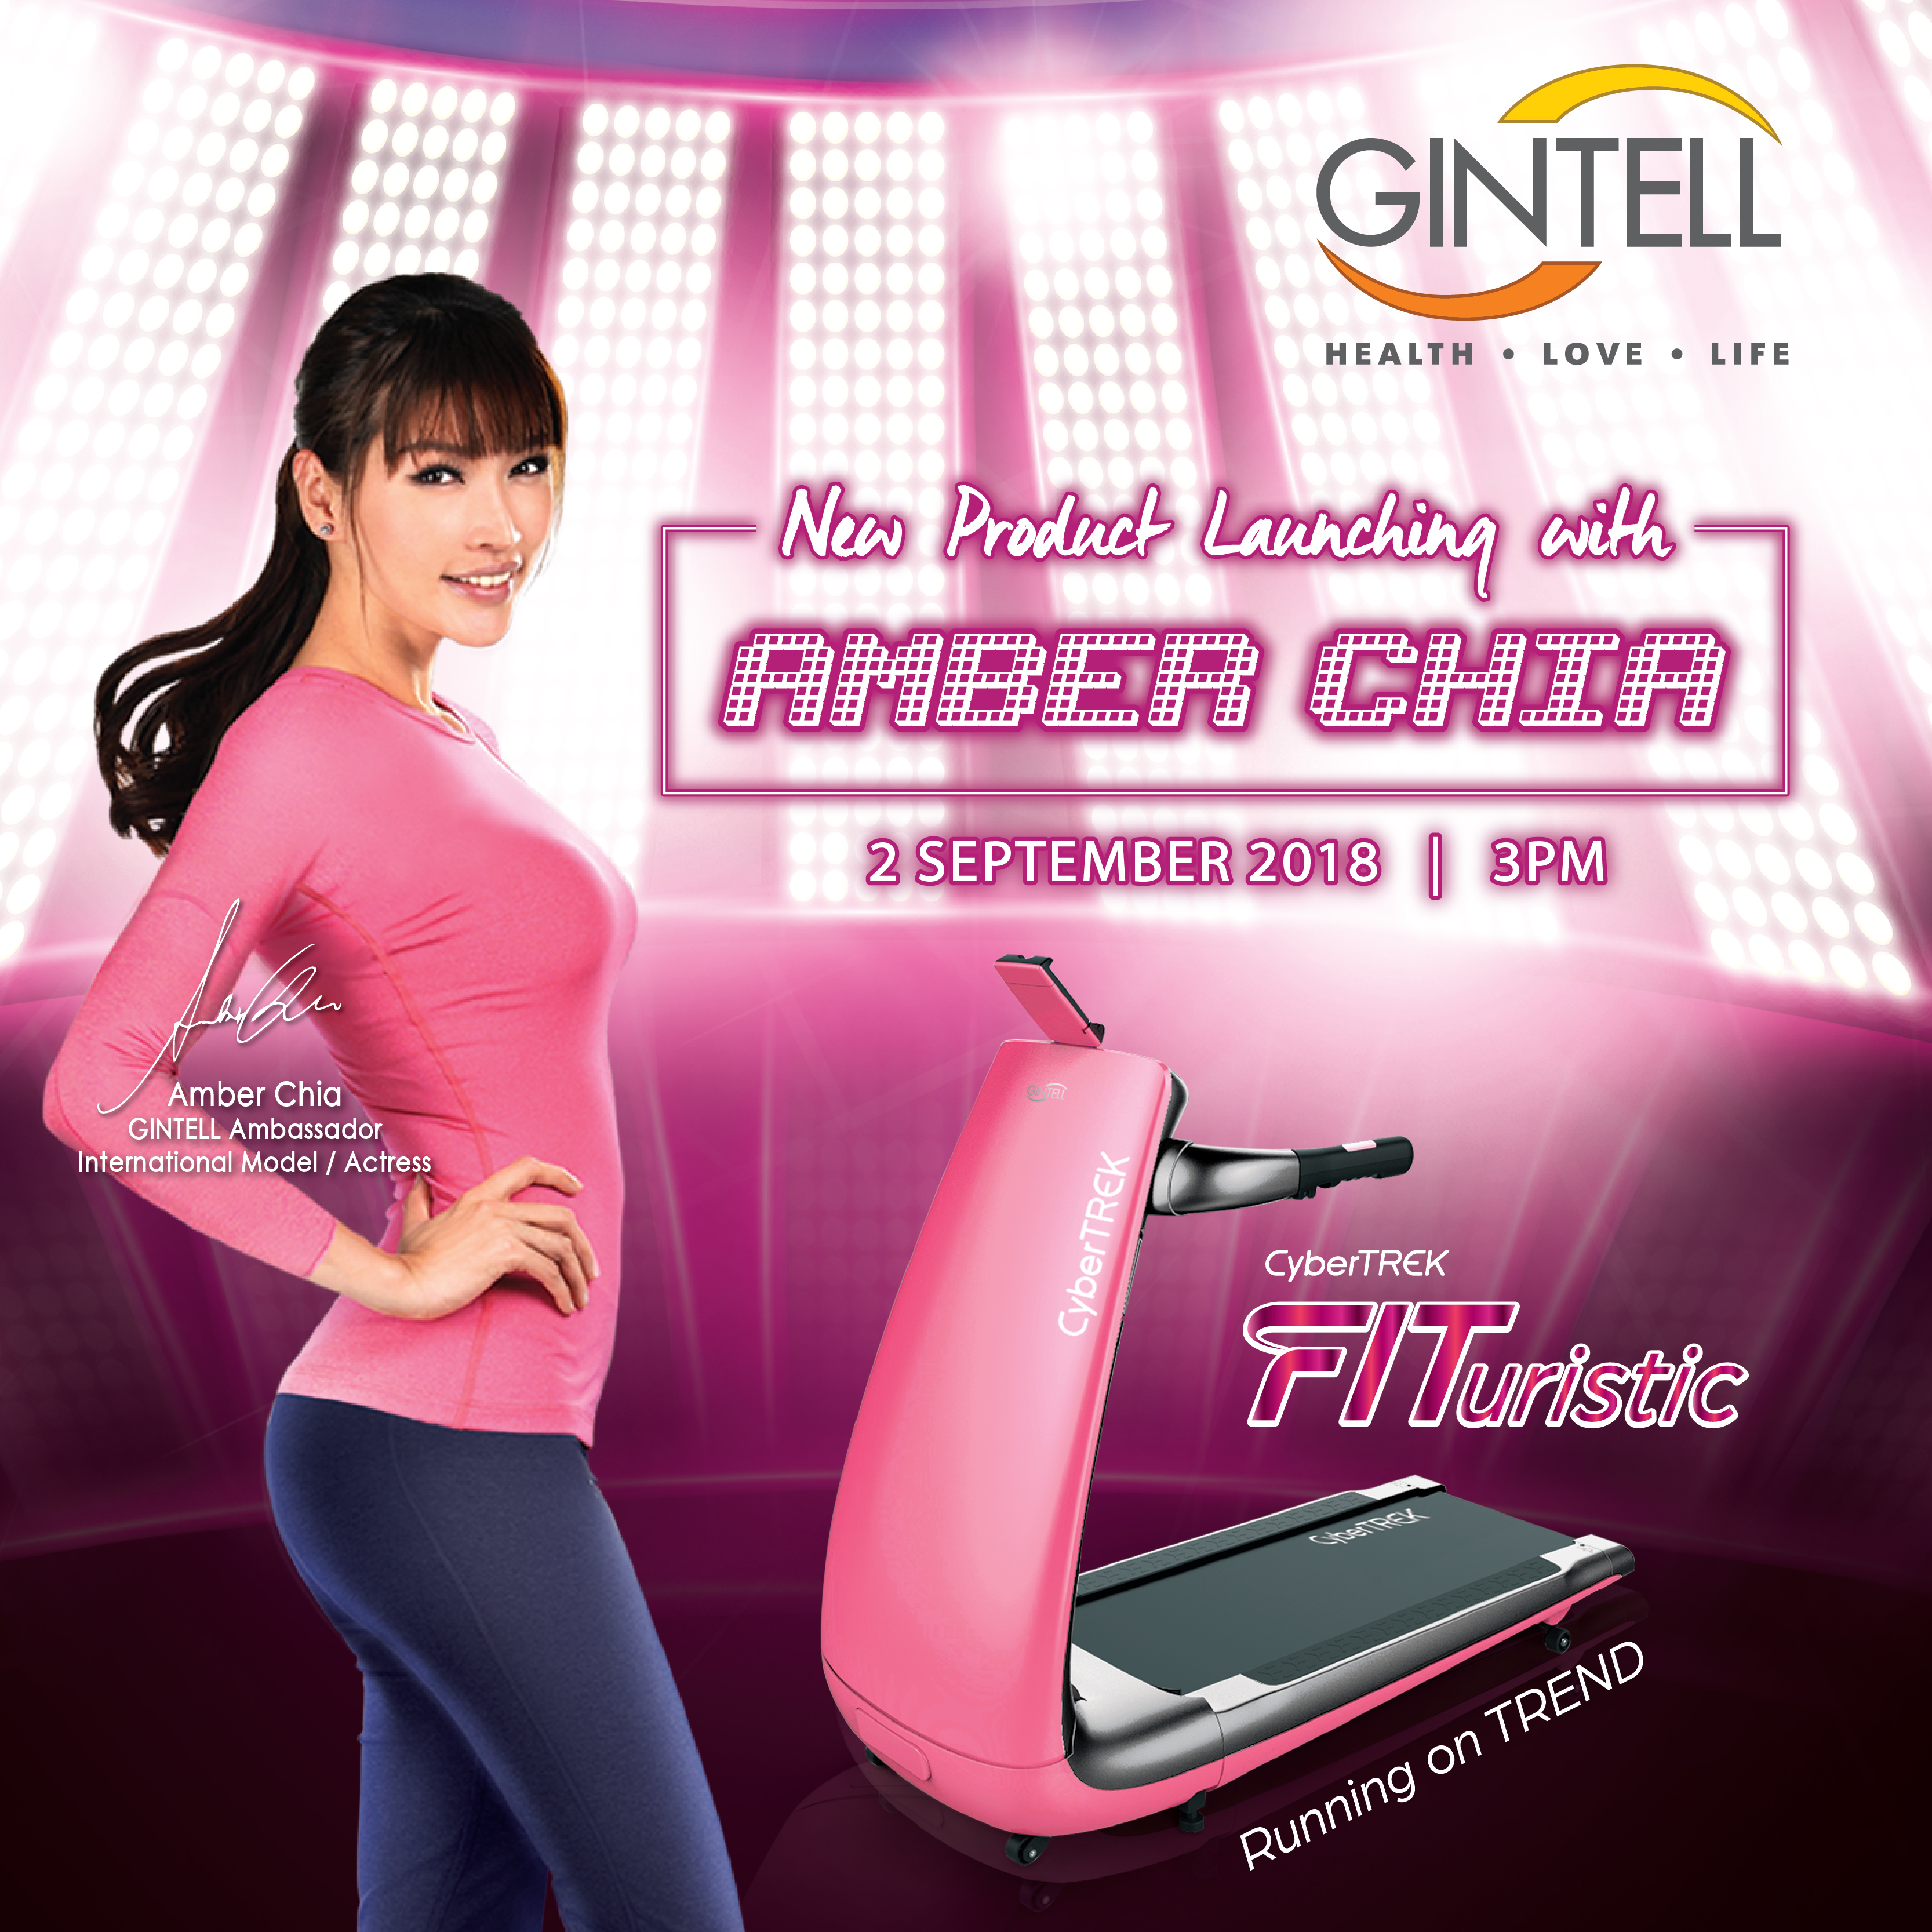 GINTELL New Product Launching with Amber Chia